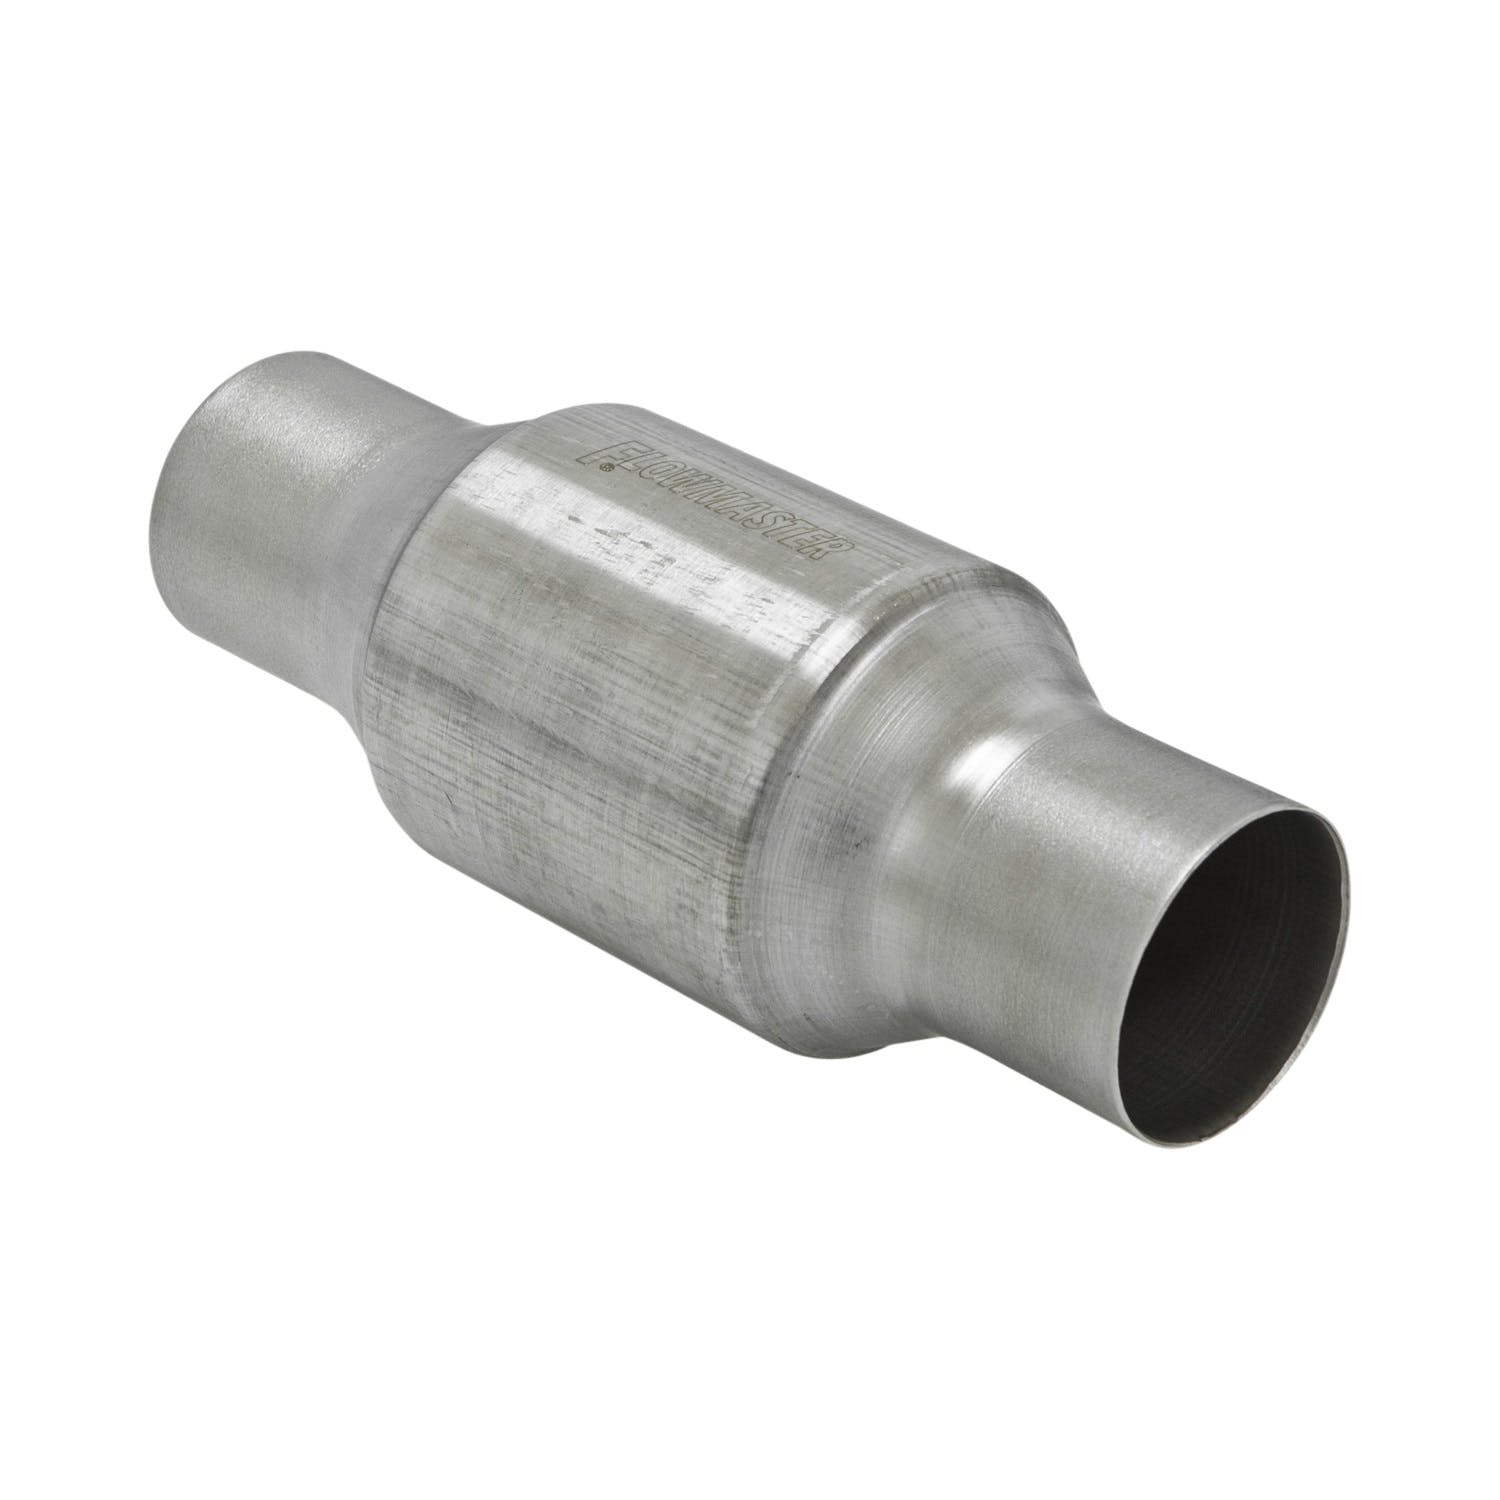 Flowmaster Catalytic Converters 2230130 Catalytic Converter-Universal-223 Series-3.00 in. Inlet/Outlet-49 State